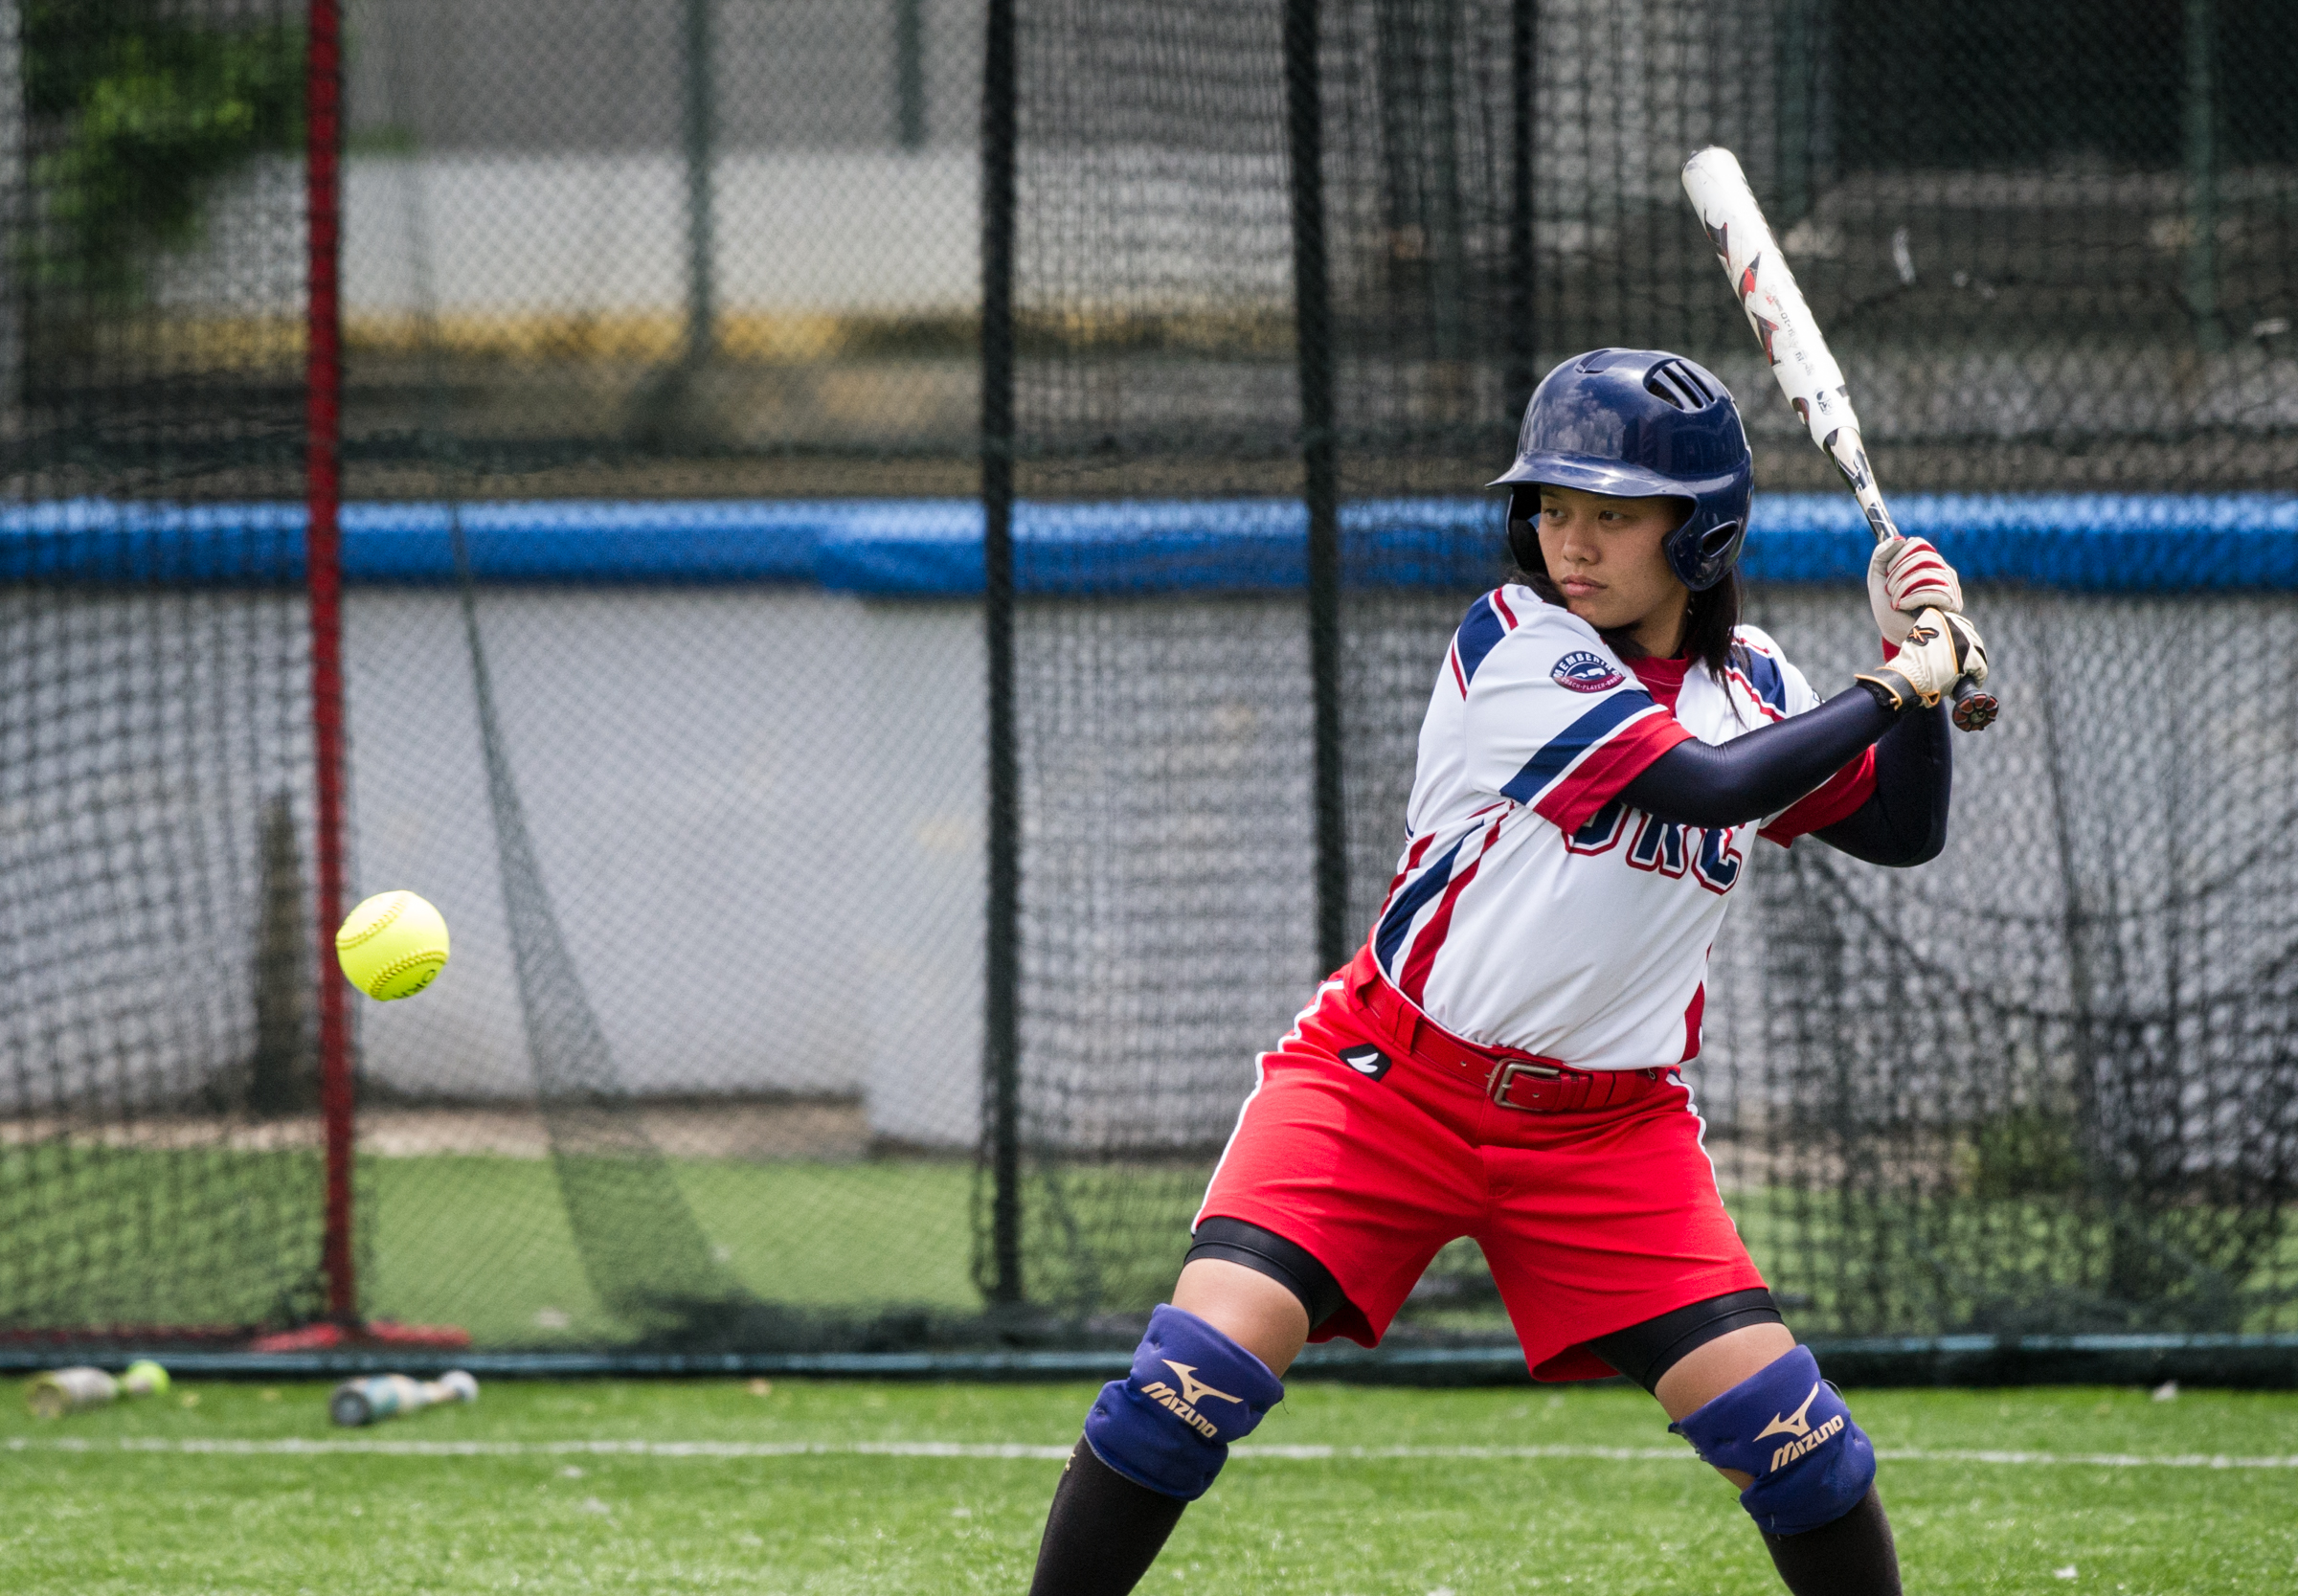 A Singaporean player prepares to hit the ball during the ORA Gryphon Cup slow pitch tournament at Raffles Institution.